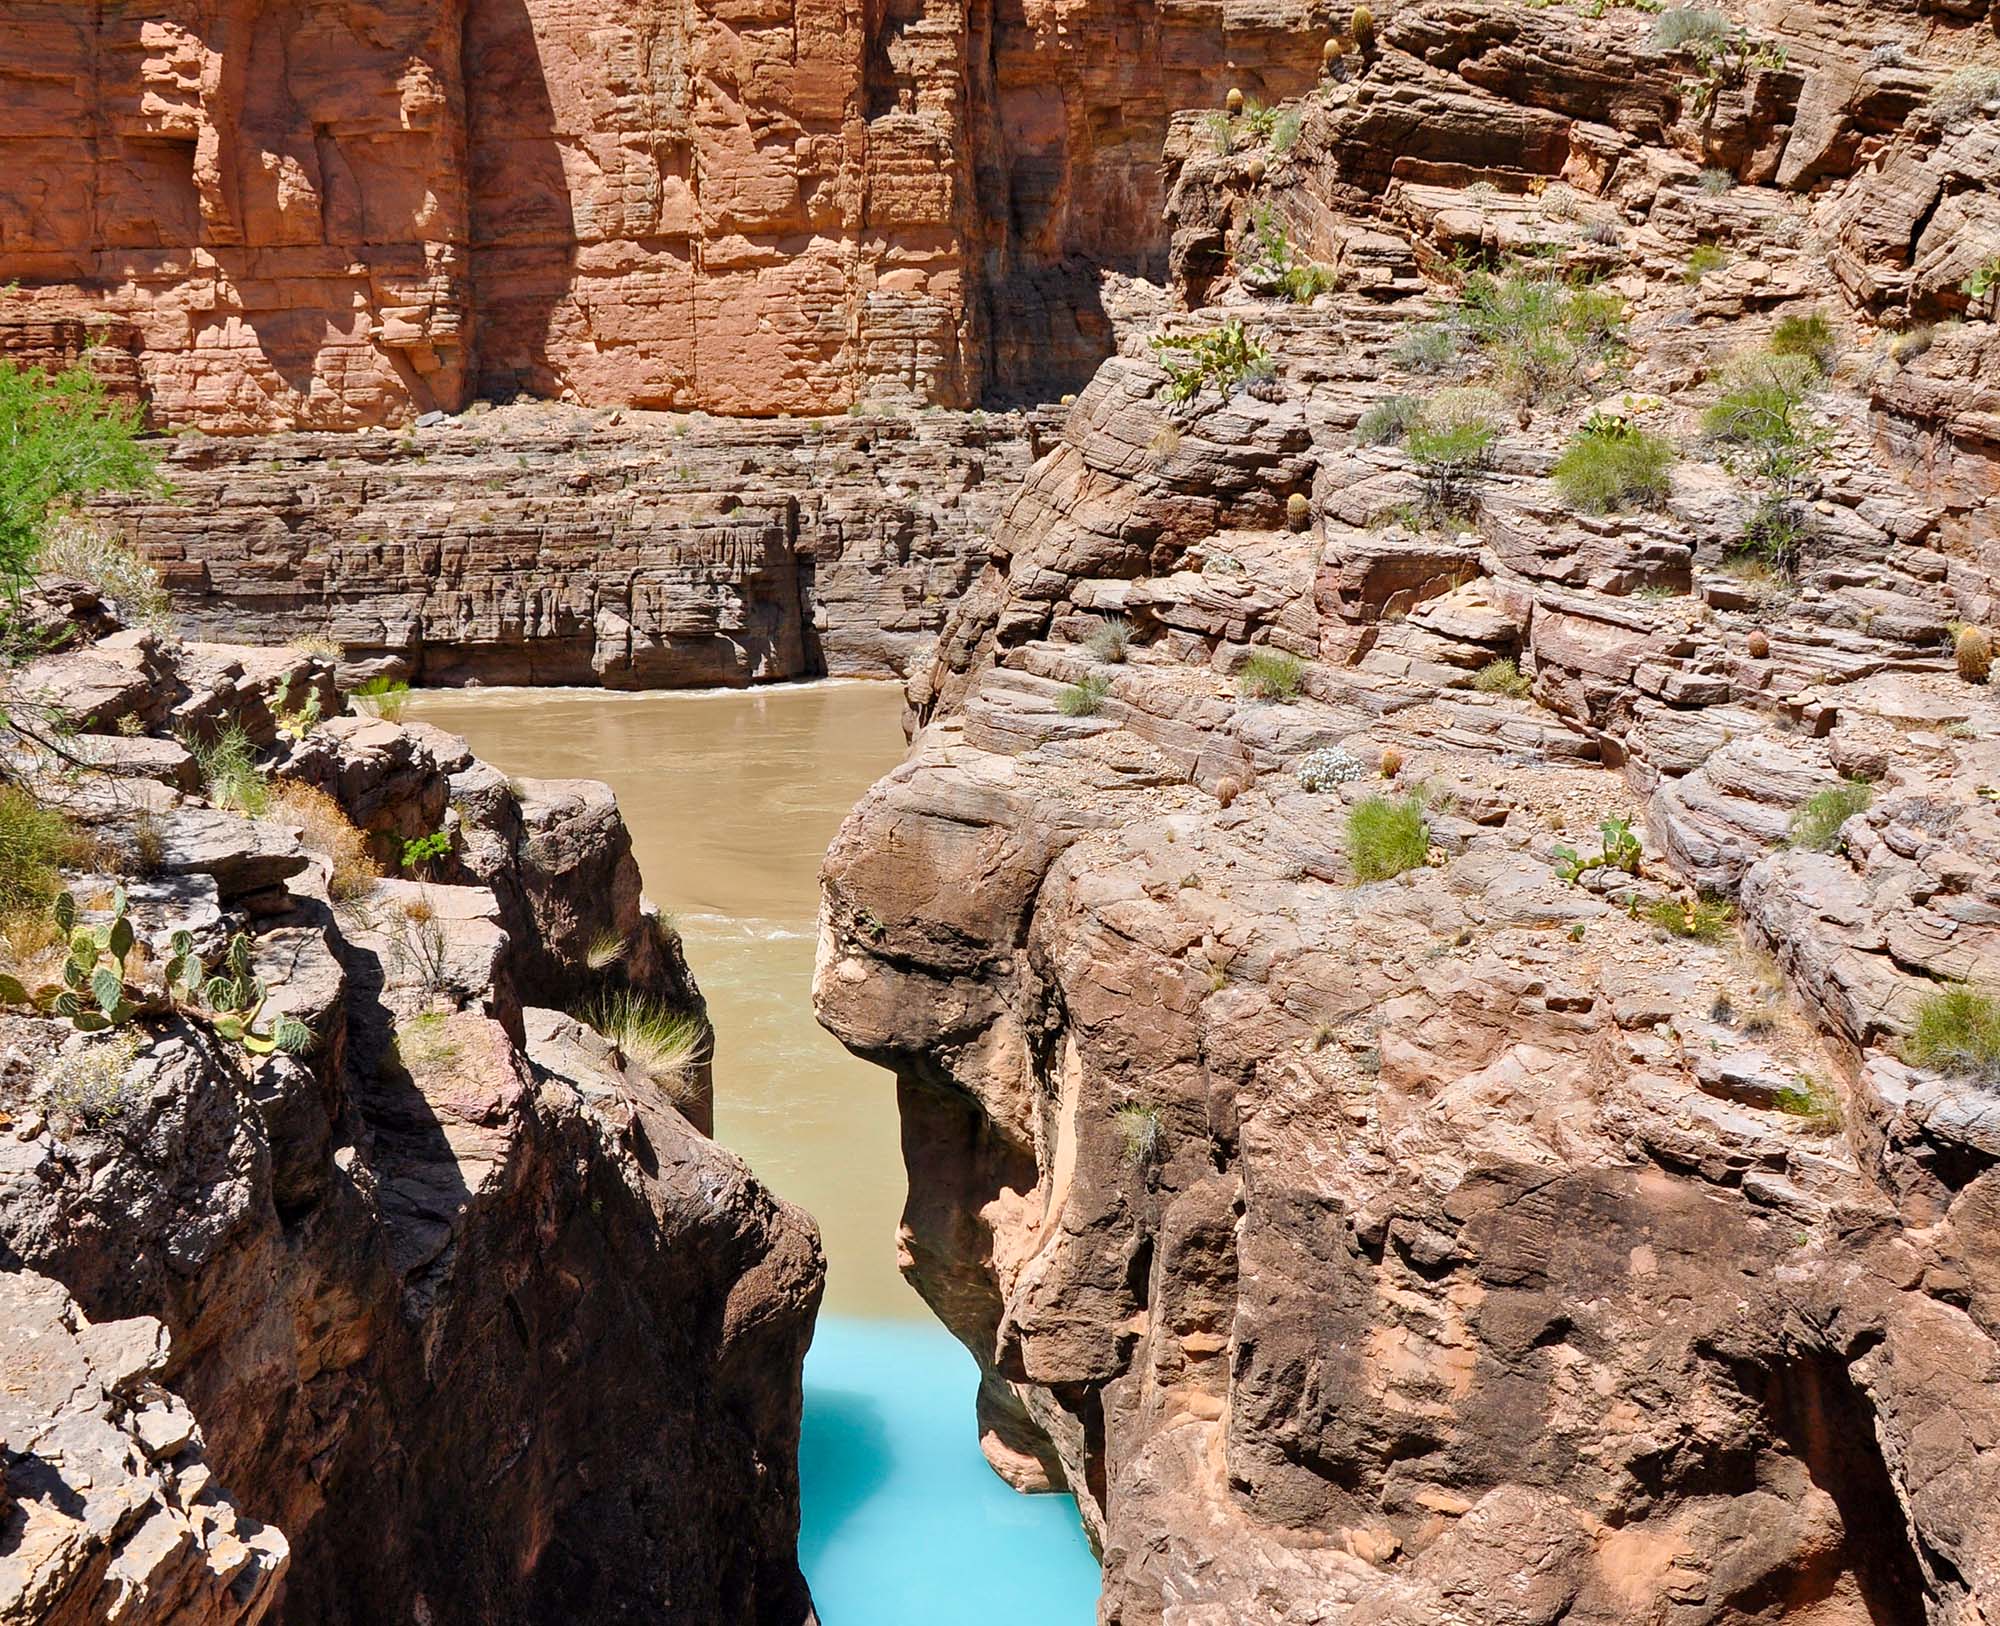 turquoise blue waters of a creek meet brown river water beneath sheer canyon walls.